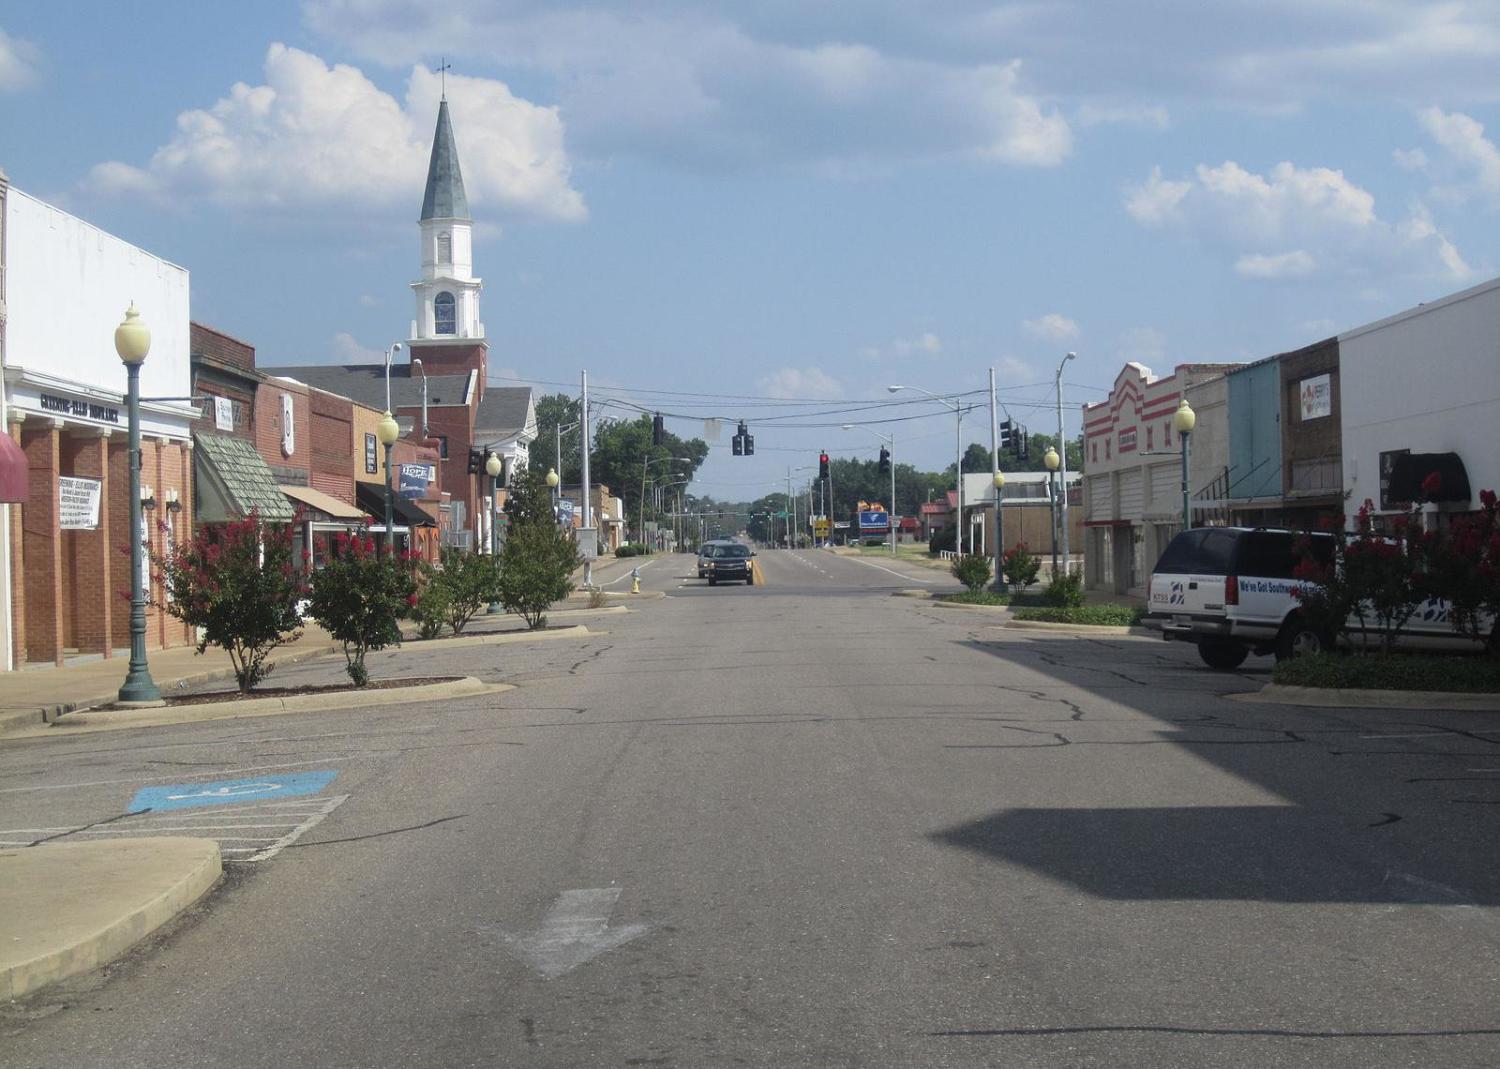 “Downtown area of a rural town” - Source: Billy Hathorn // Wikimedia Commons